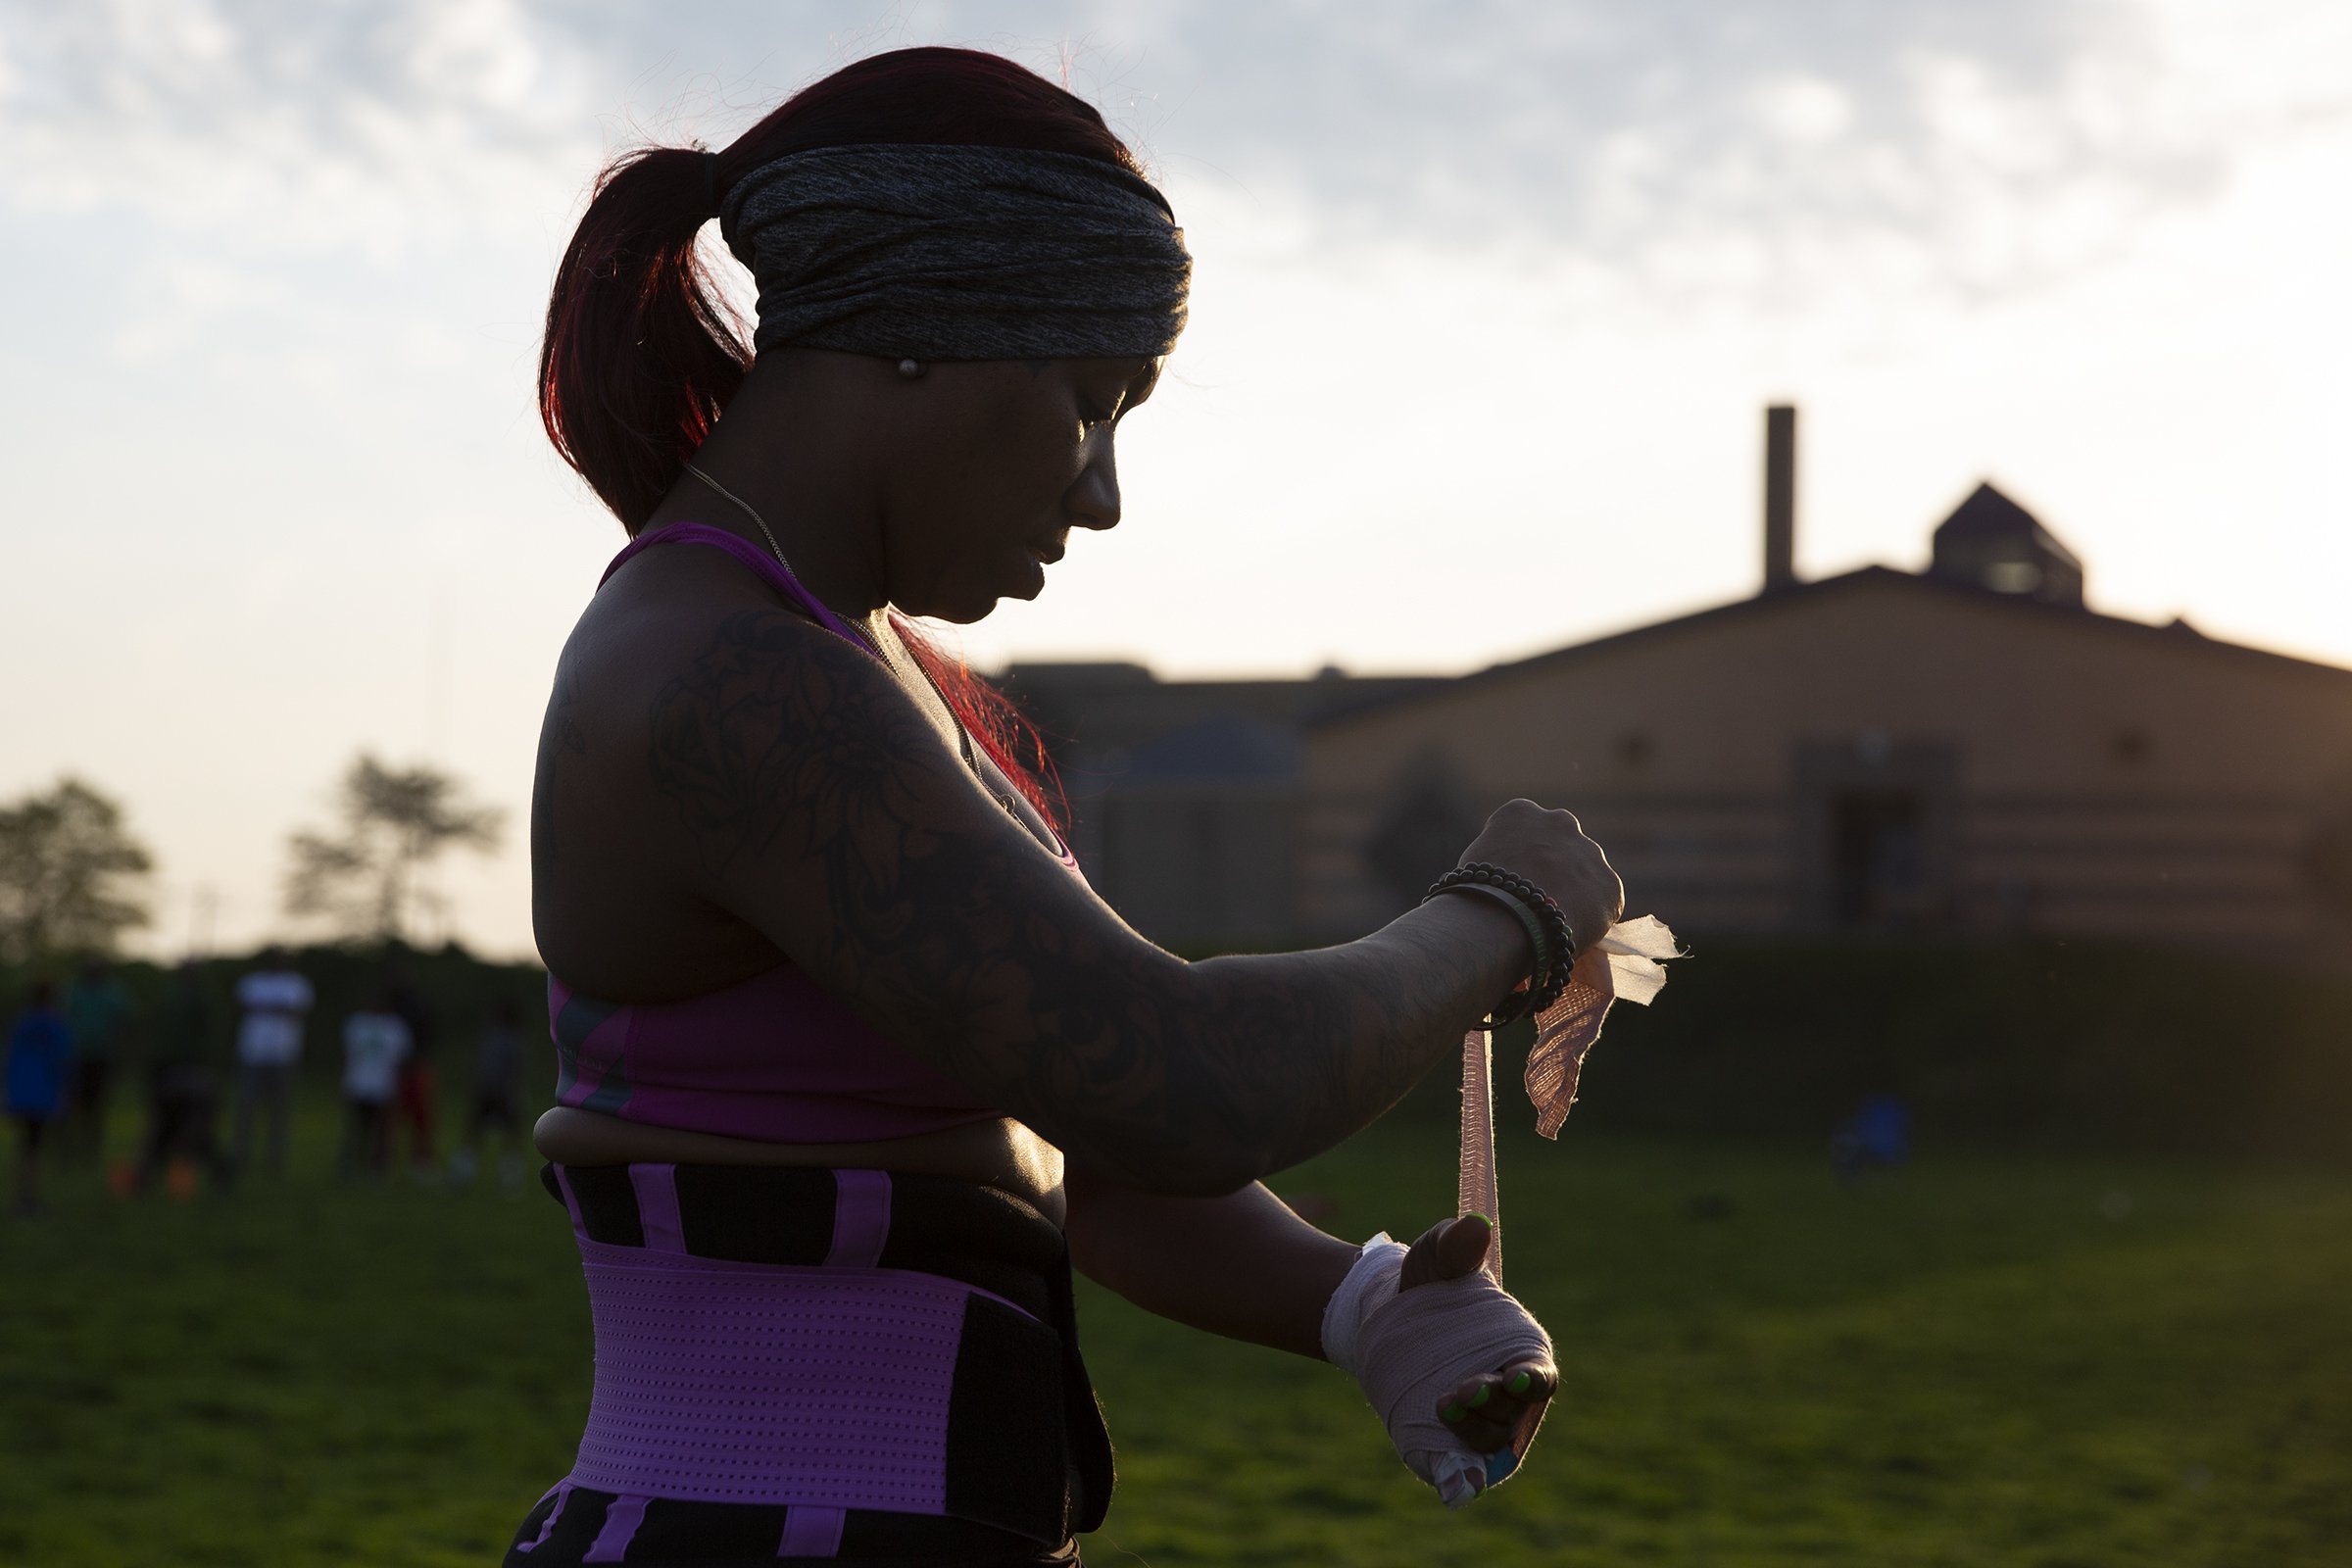  Star Wright, owner and player on the Philadelphia Phantomz, a tackle women’s football team, tapes up her wrist before practice in North Philly on April 18, 2019 